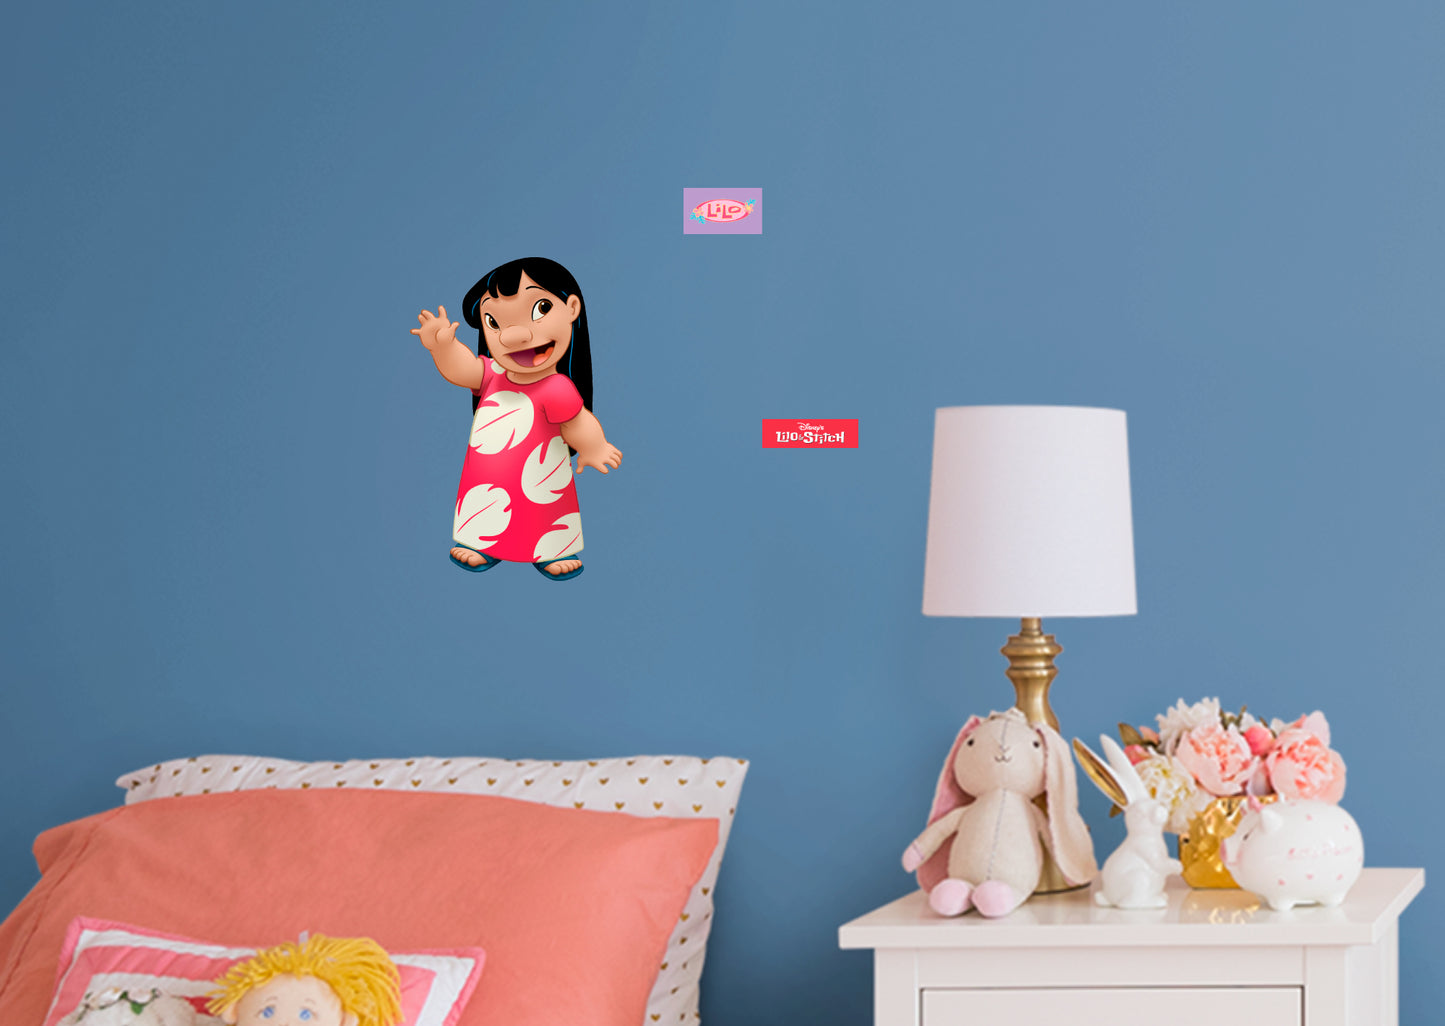 Lilo & Stitch: Lilo RealBig - Officially Licensed Disney Removable Adhesive Decal